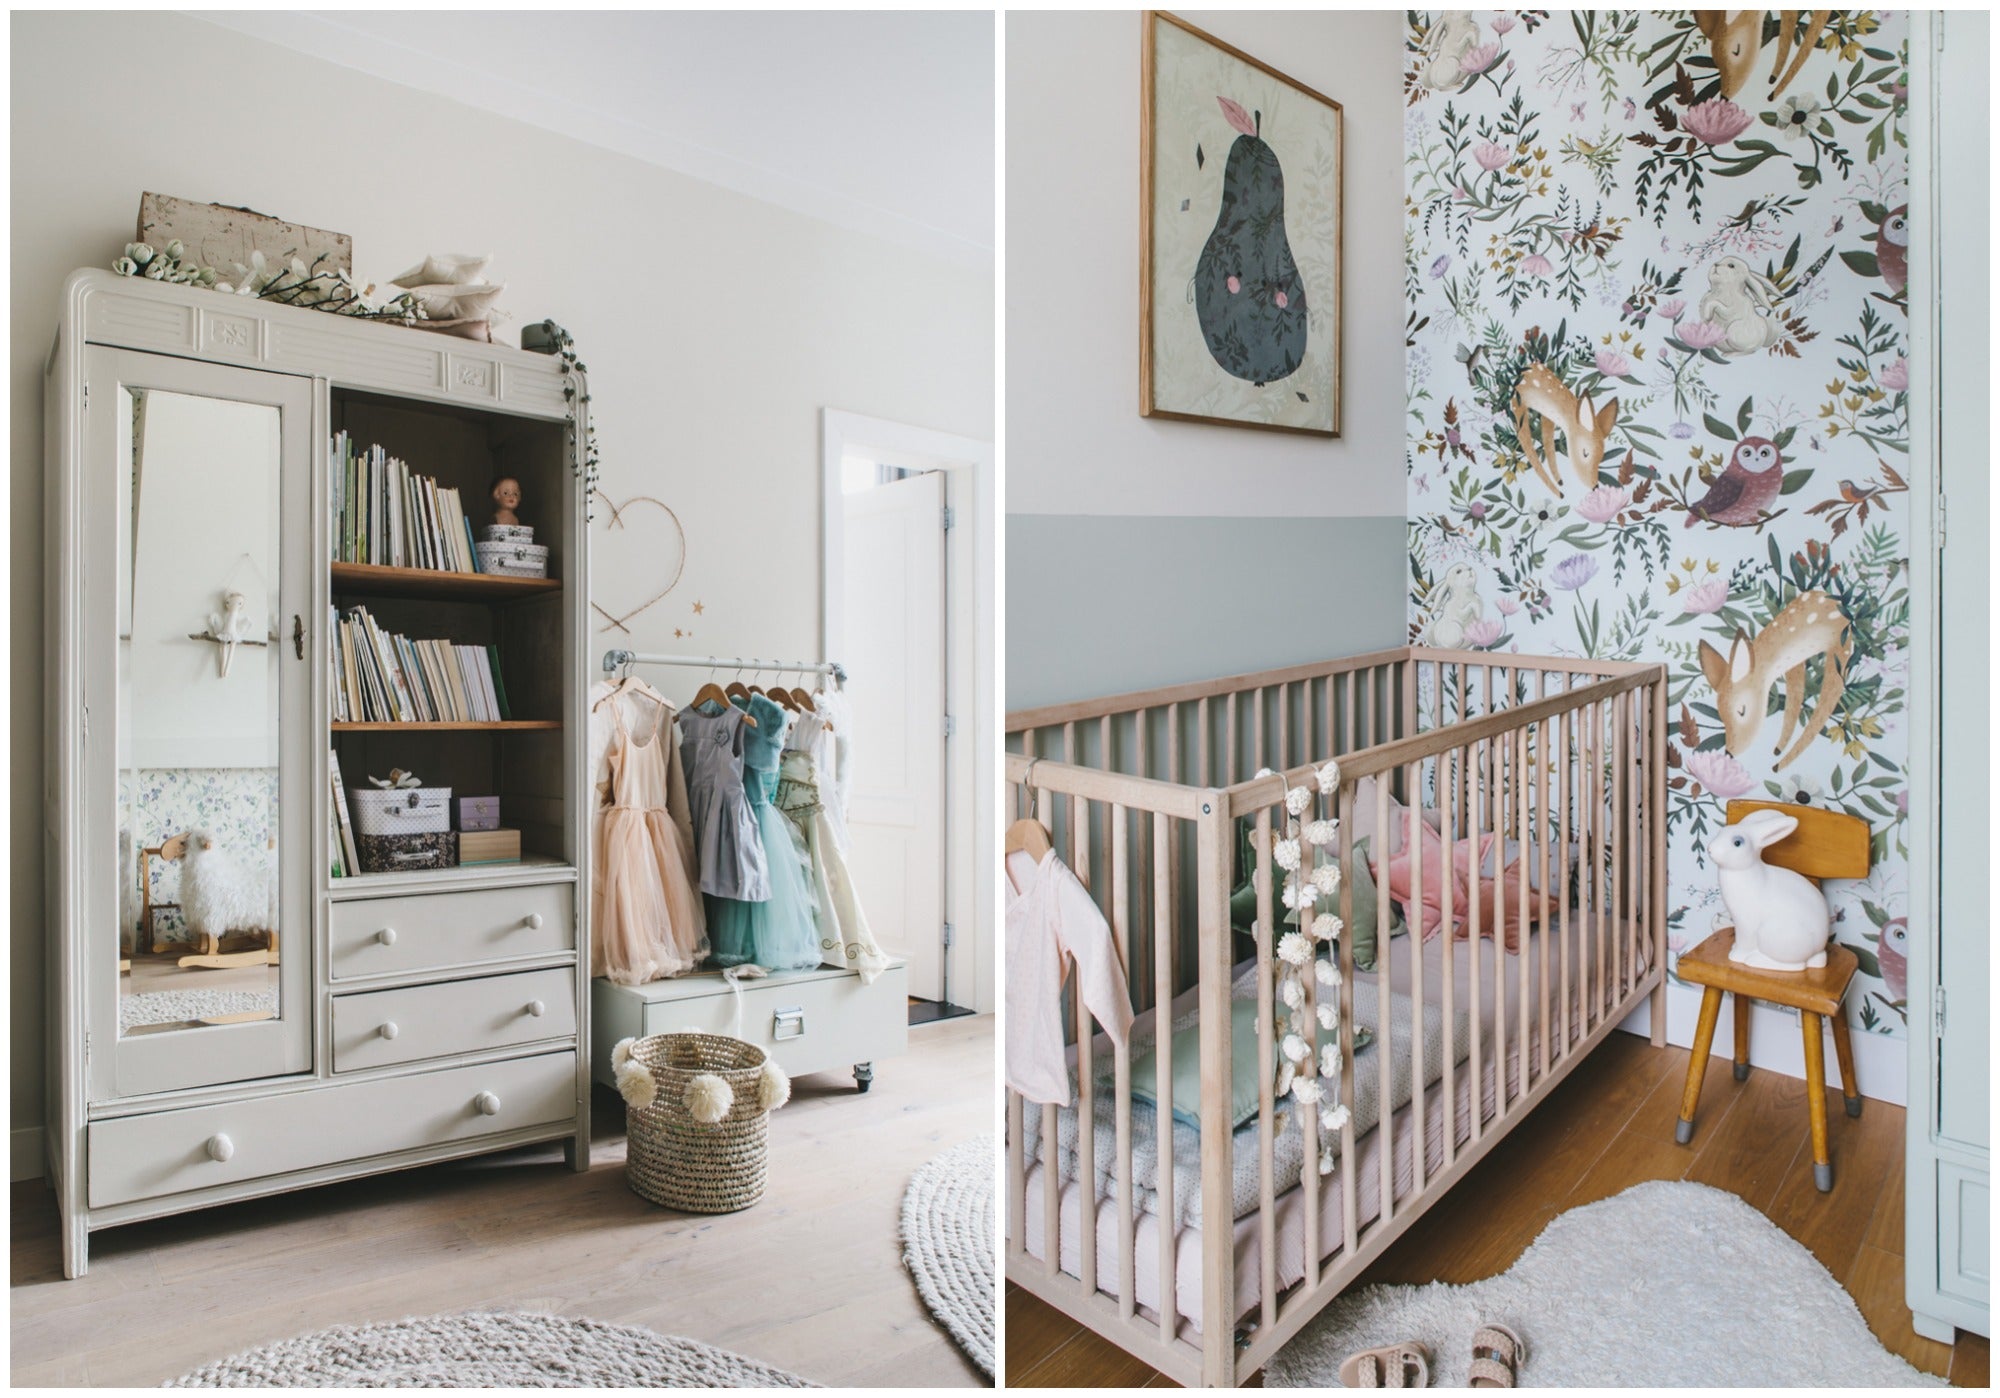 We talk interiors for children with Room To Bloom's Ursula Wesselingh